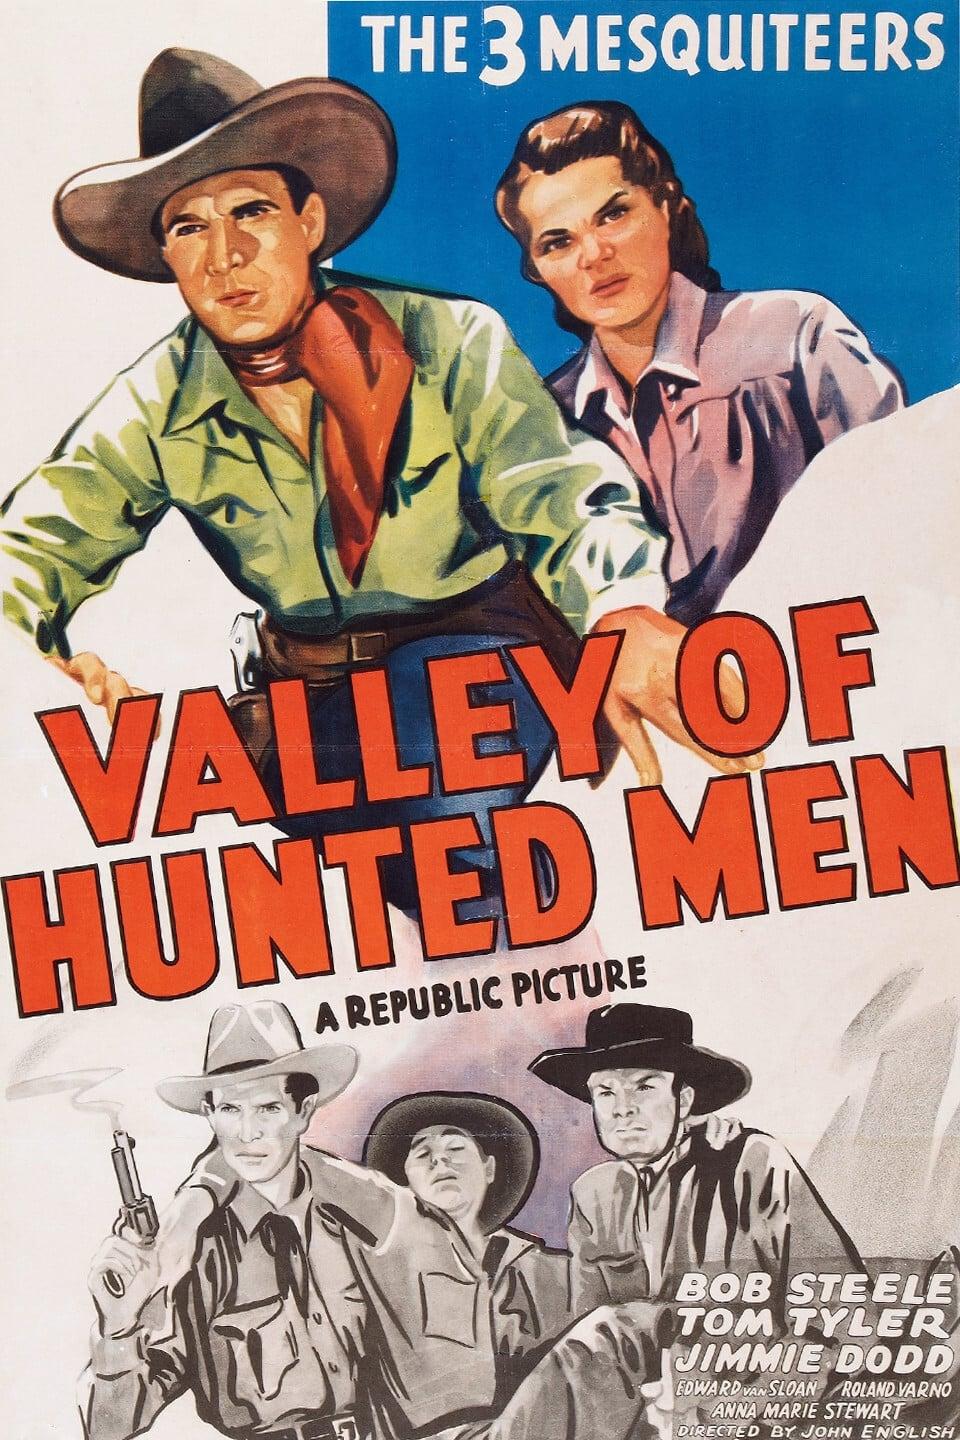 Valley of Hunted Men poster